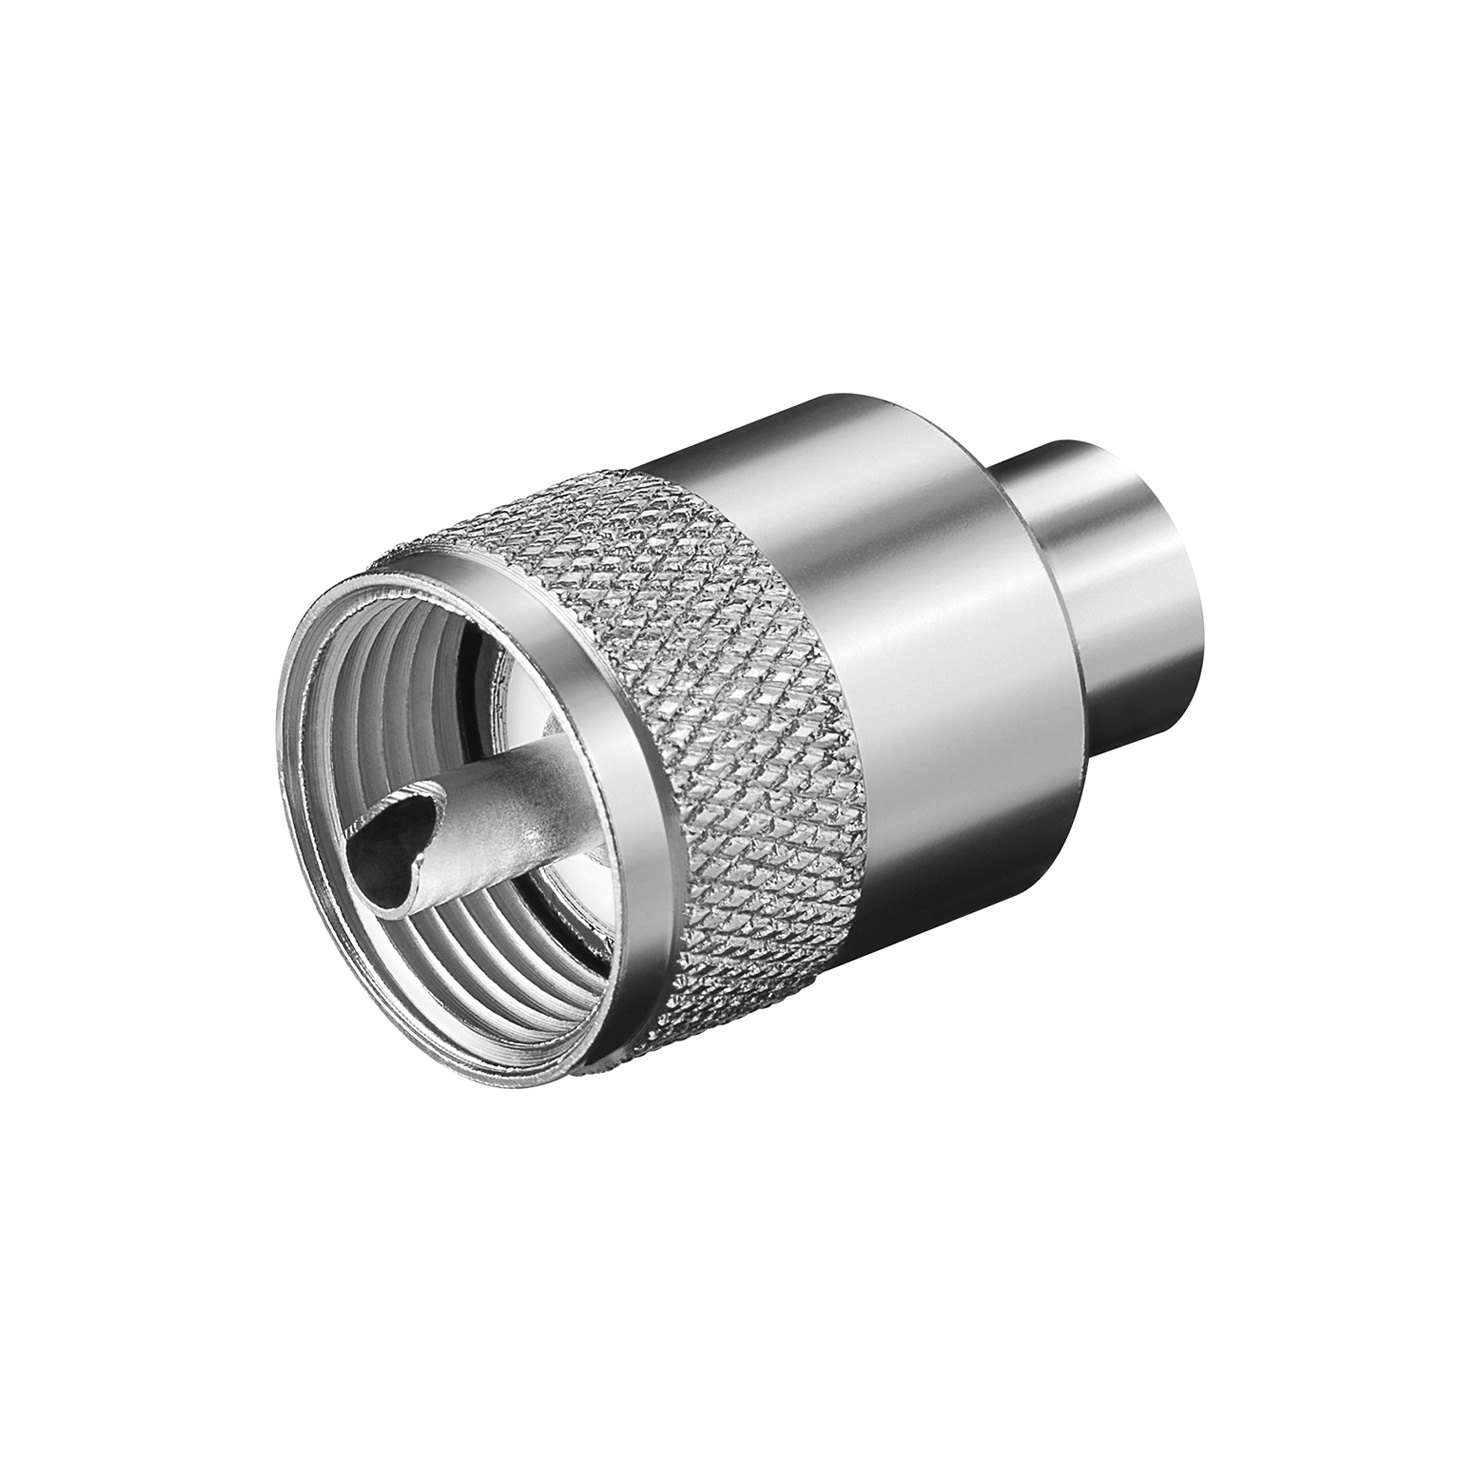 Glomex SGVPL259 PL259 Male Connector for RG-58 Coax and Supergain Antennas (Bulk pack)